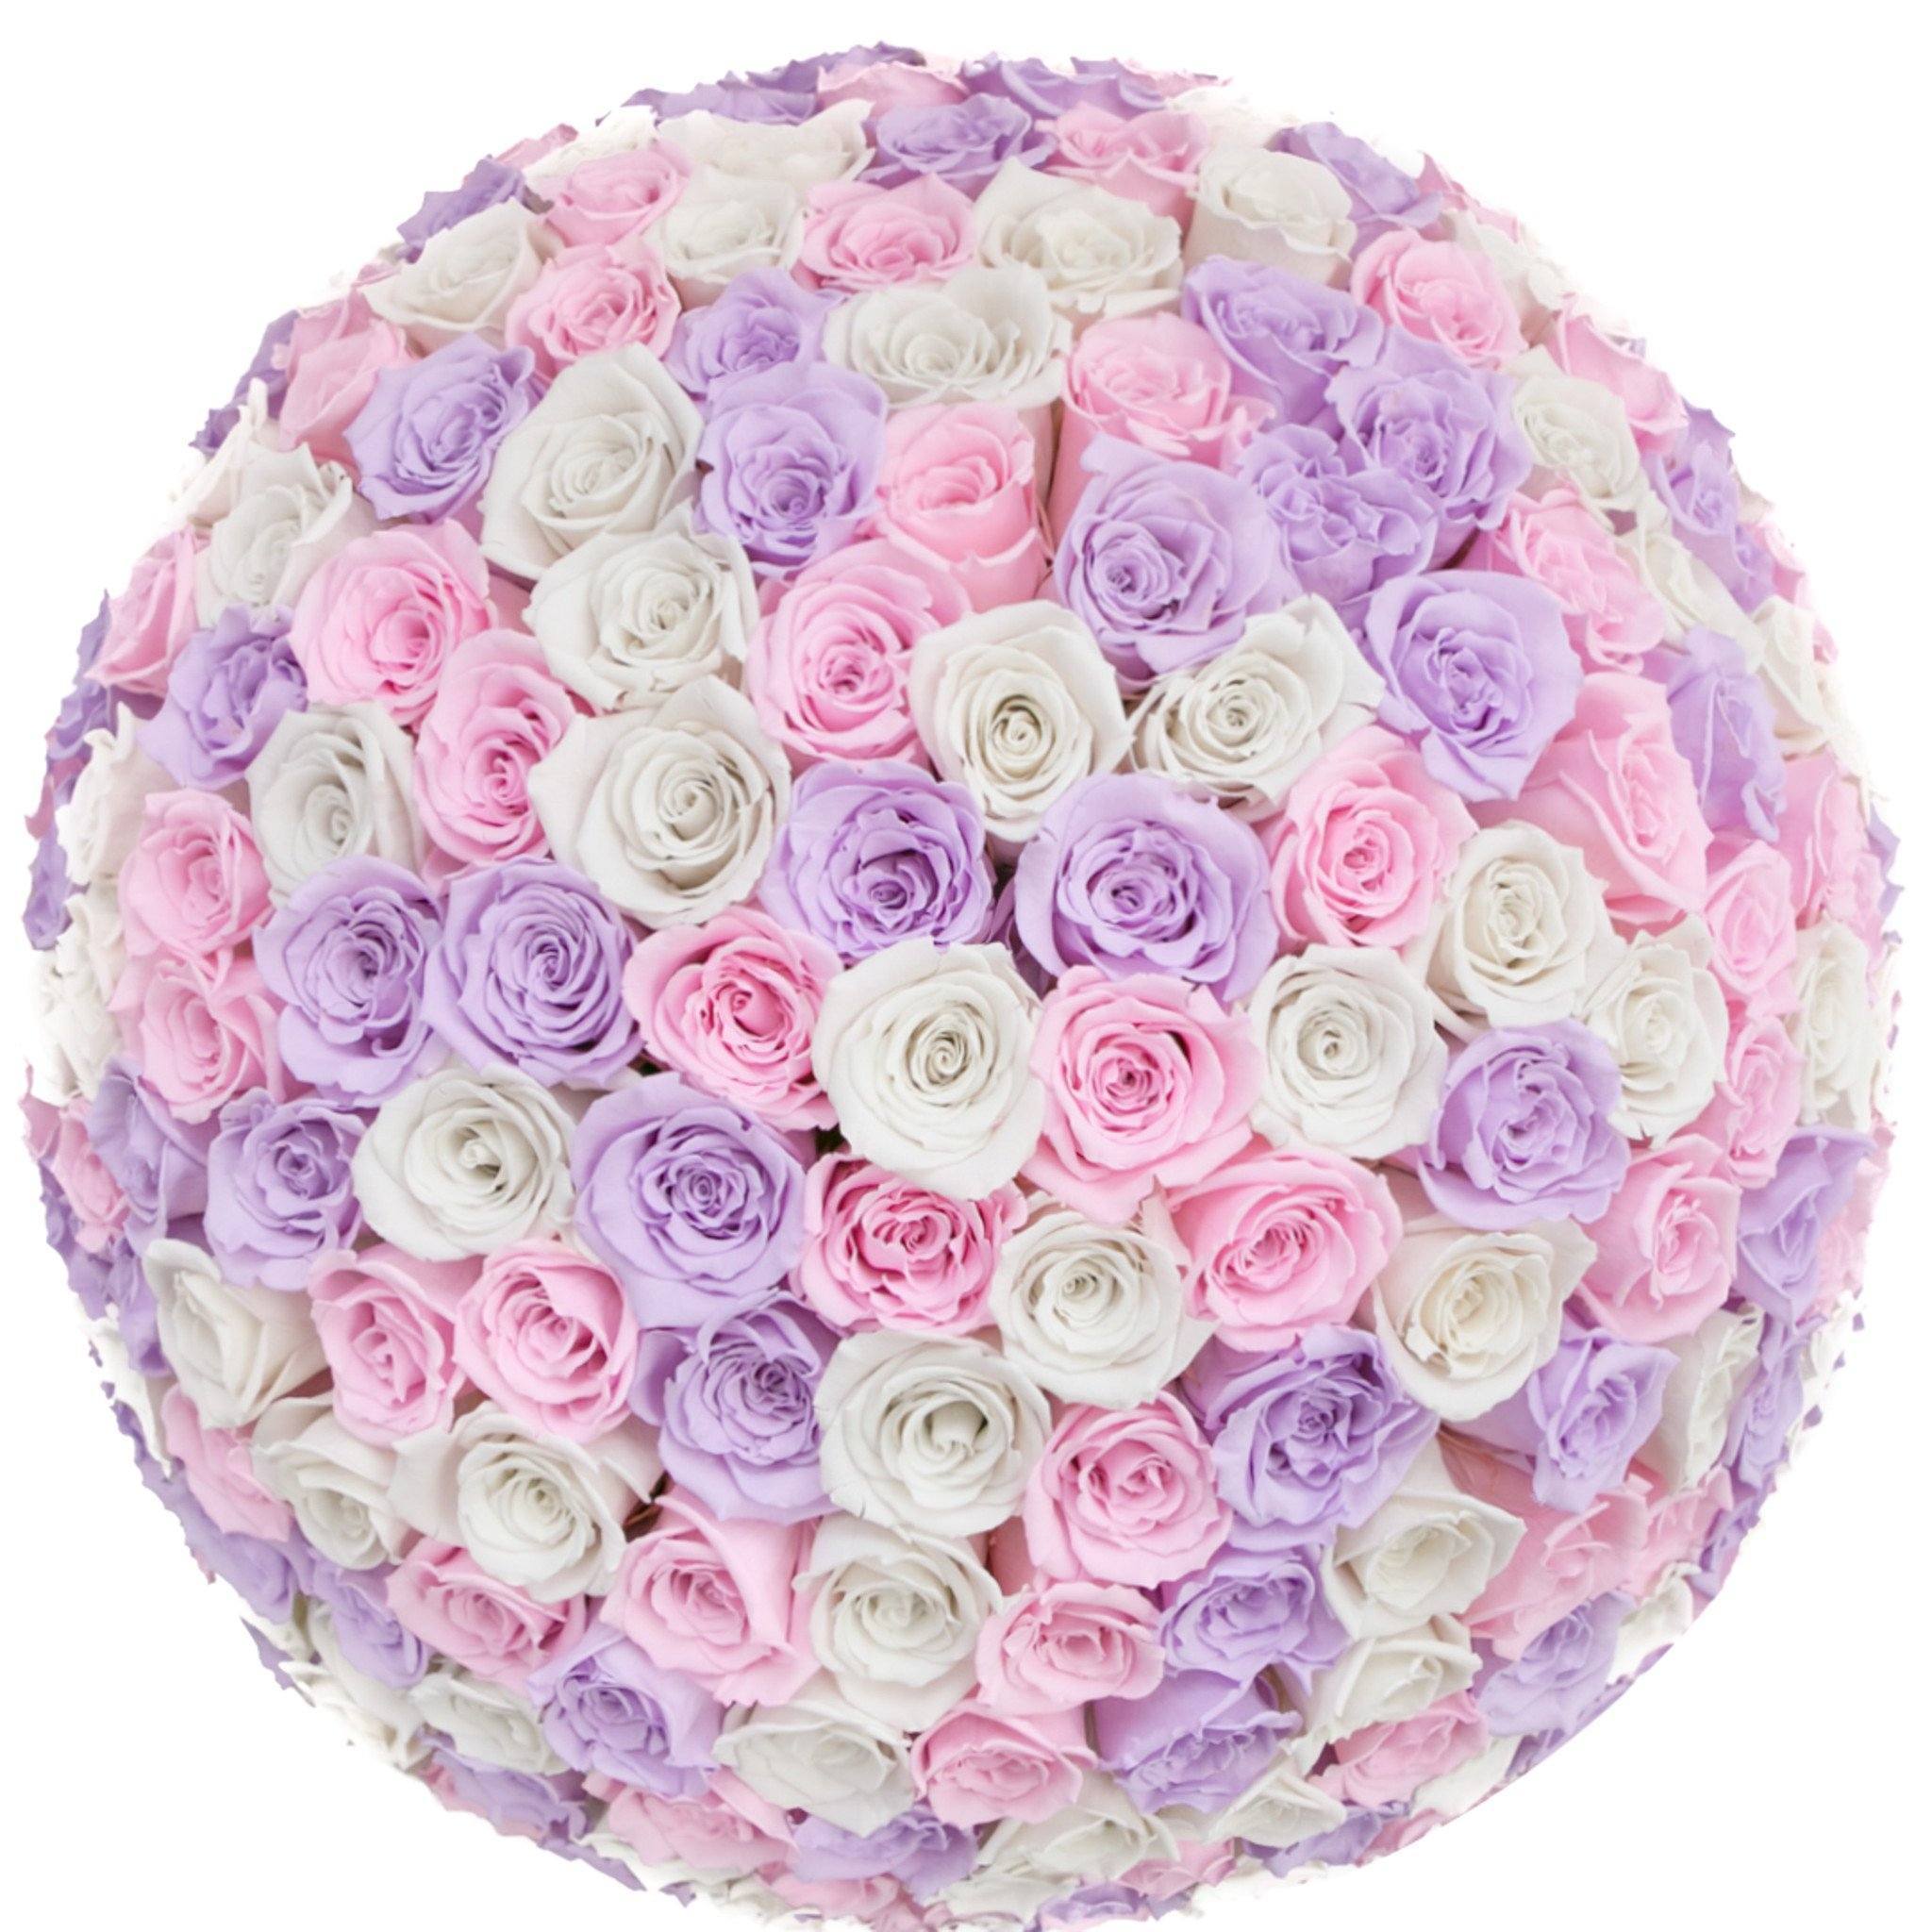 the million LARGE  DOME box - white - white-pink-lavender (dome) ETERNITY roses mixed eternity roses - the million roses